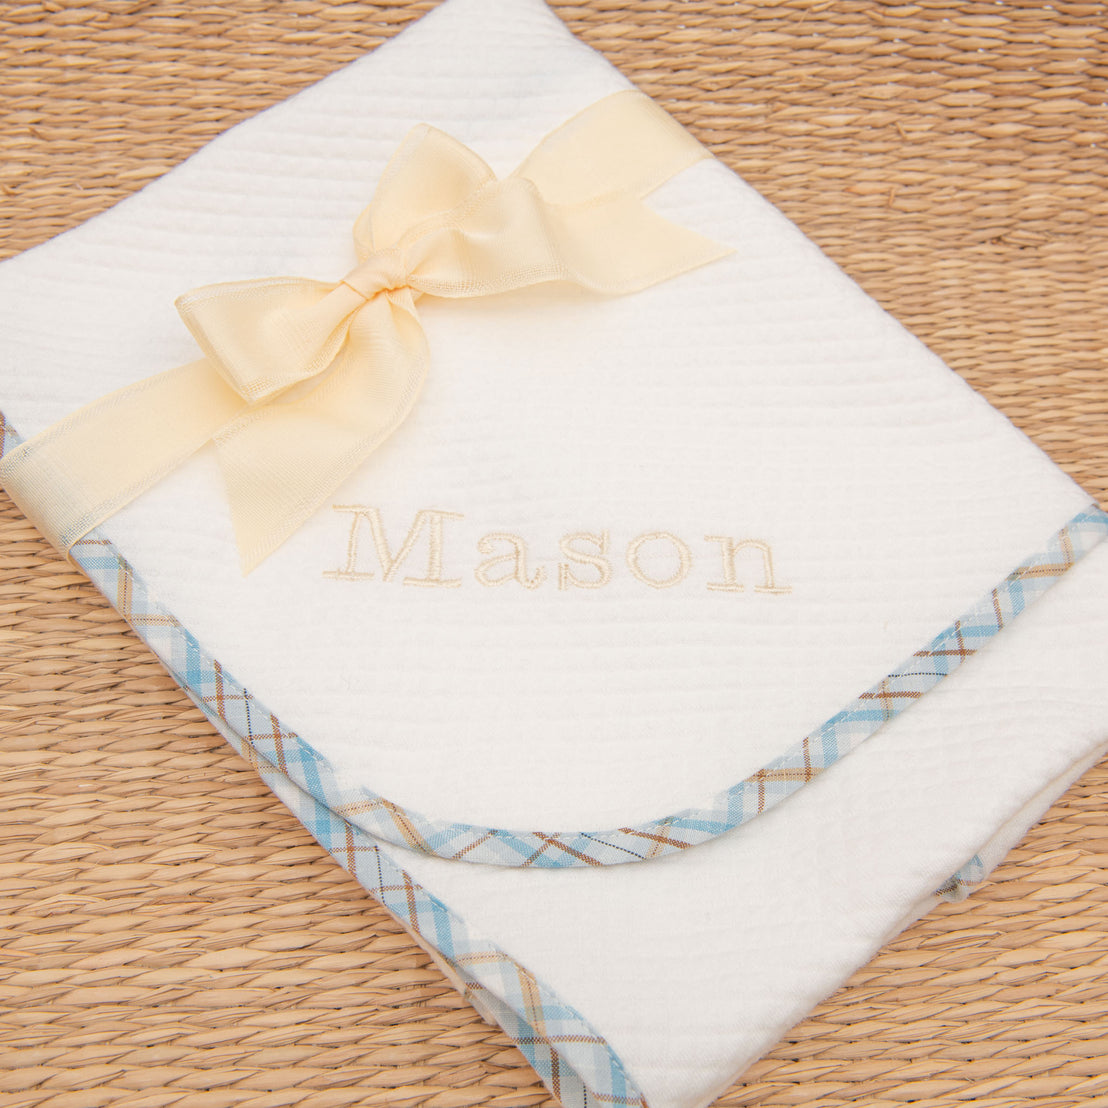 A Mason Newborn Personalized Blanket with the name "Mason" embroidered in gold for a christening, wrapped and decorated with a yellow ribbon bow. The blanket is lined with blue checkered trim, displayed on a vintage wicker background.